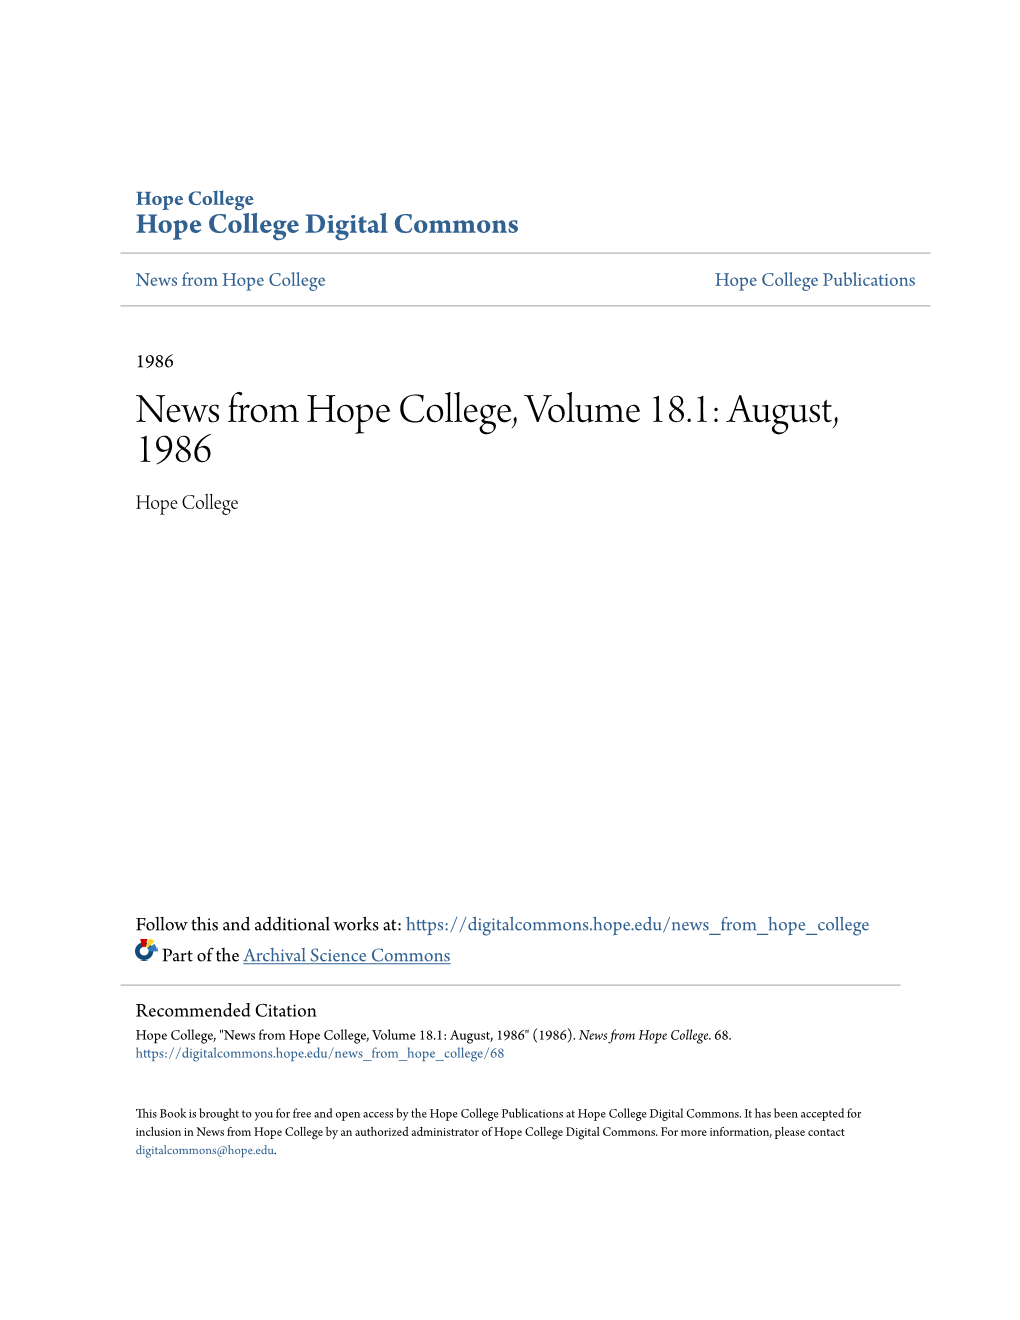 News from Hope College, Volume 18.1: August, 1986 Hope College